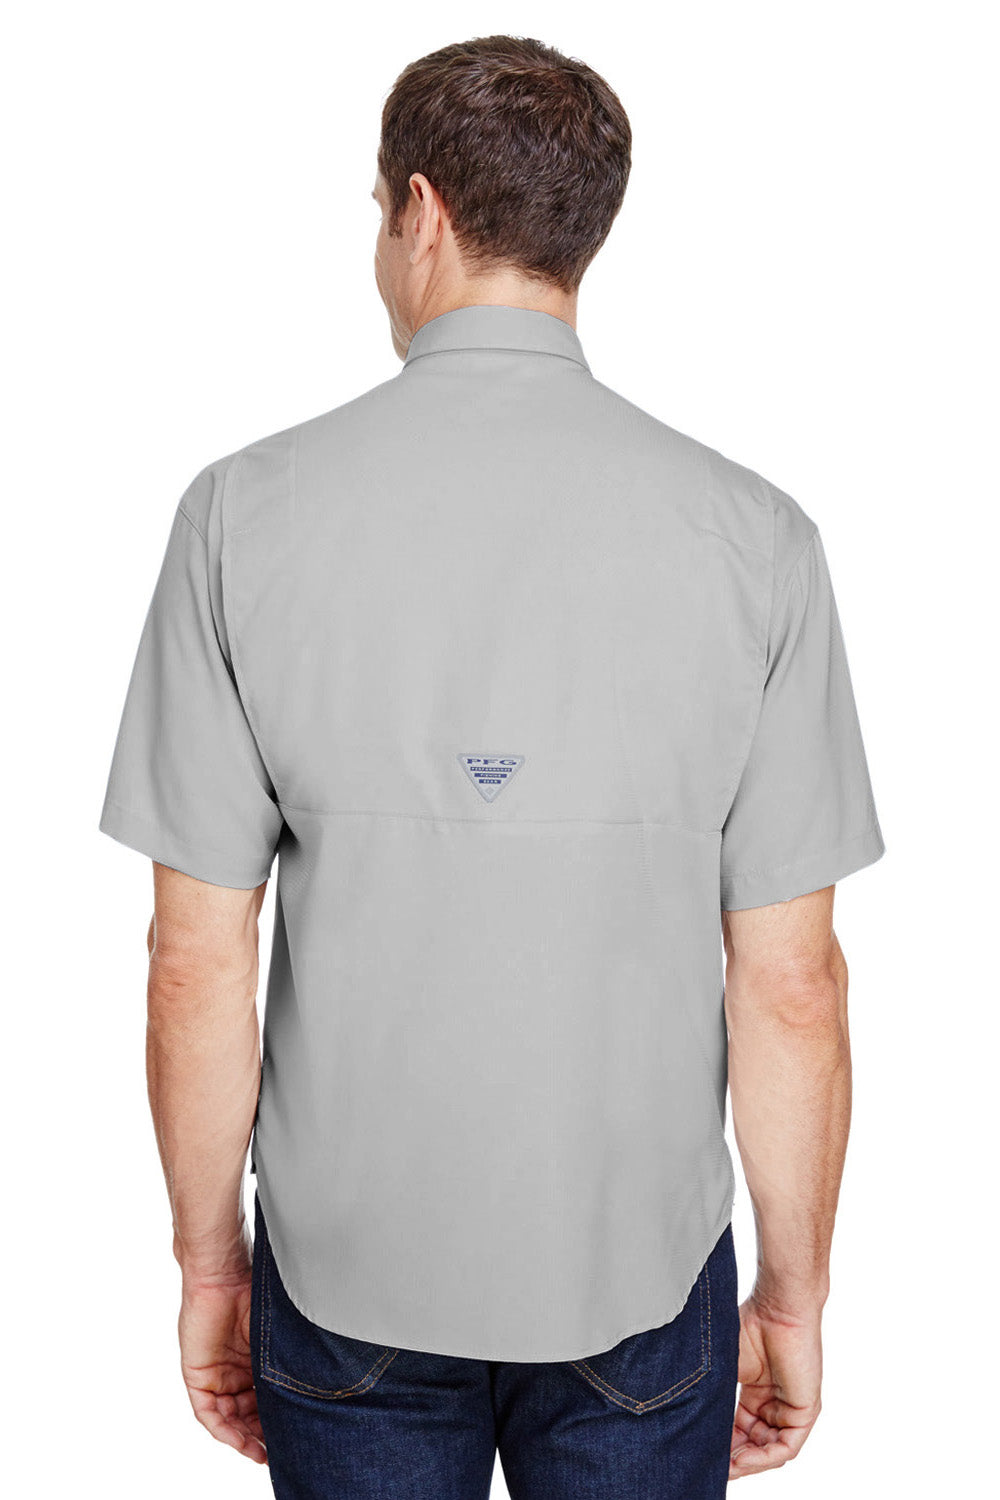 Columbia 7266 Tamiami II Moisture Wicking Short Sleeve Button Down Shirt w/ Double Pockets Cool Grey Back